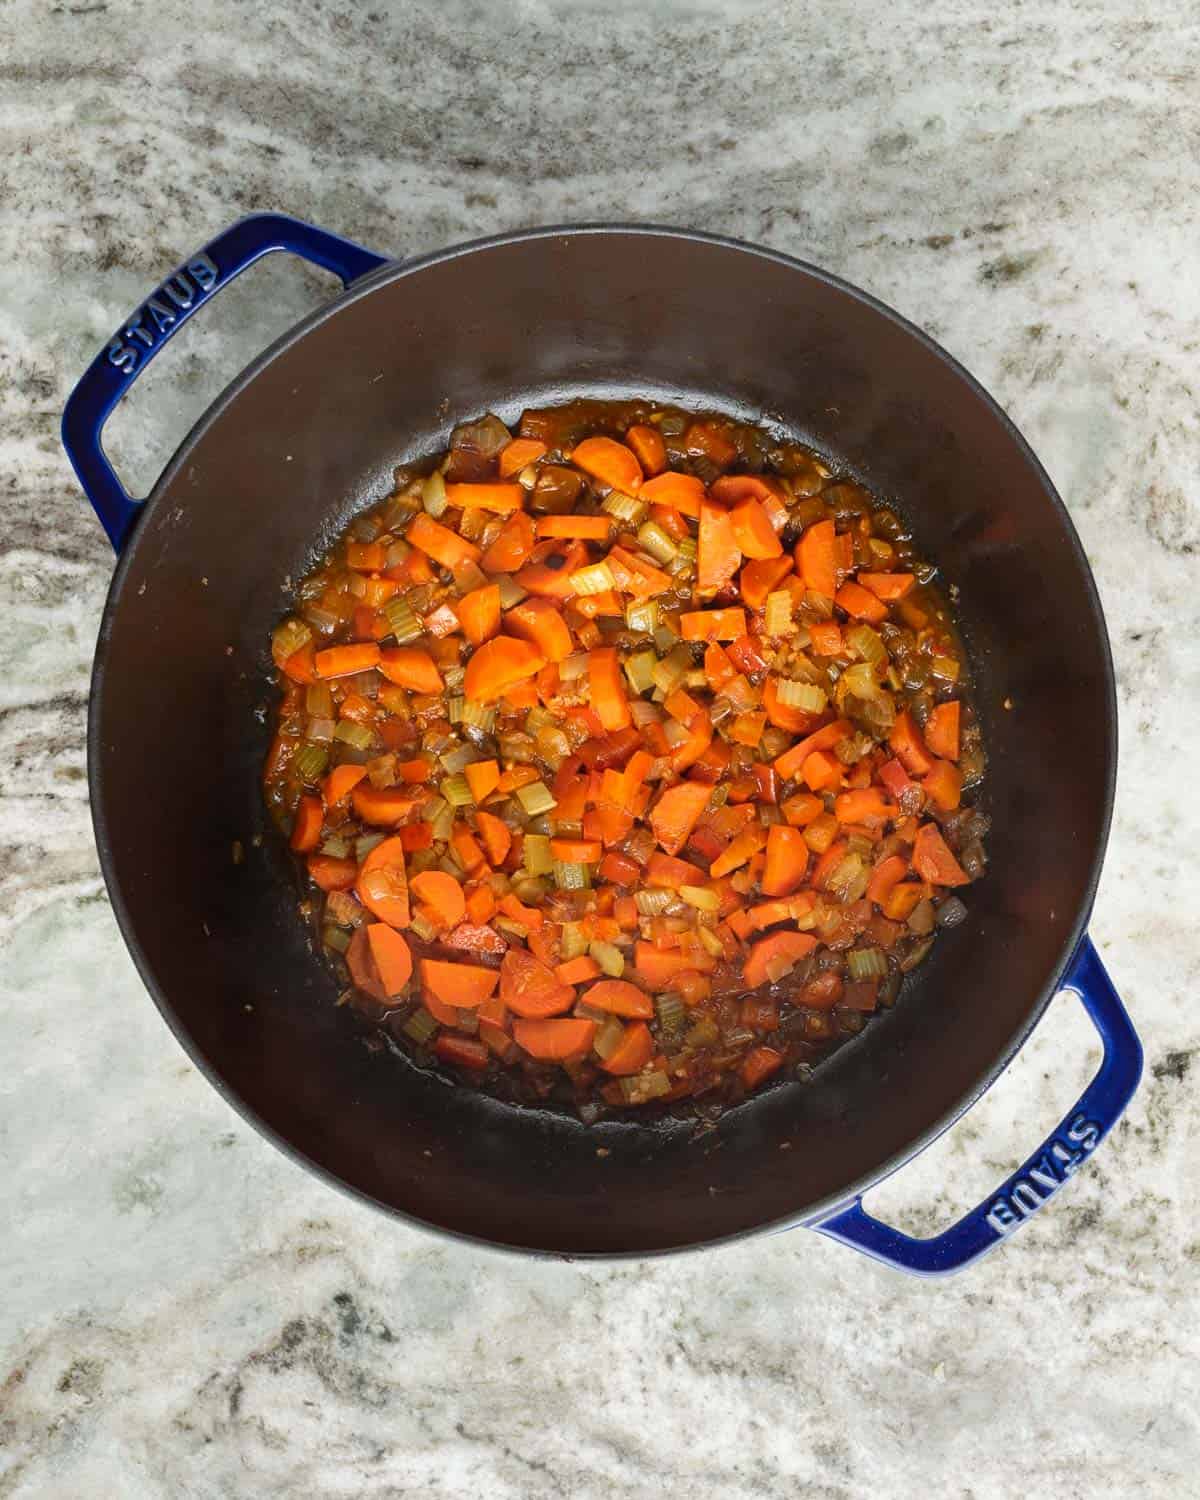 A pot with caramelized carrots, onions, celery and peppers deglazed with wine.